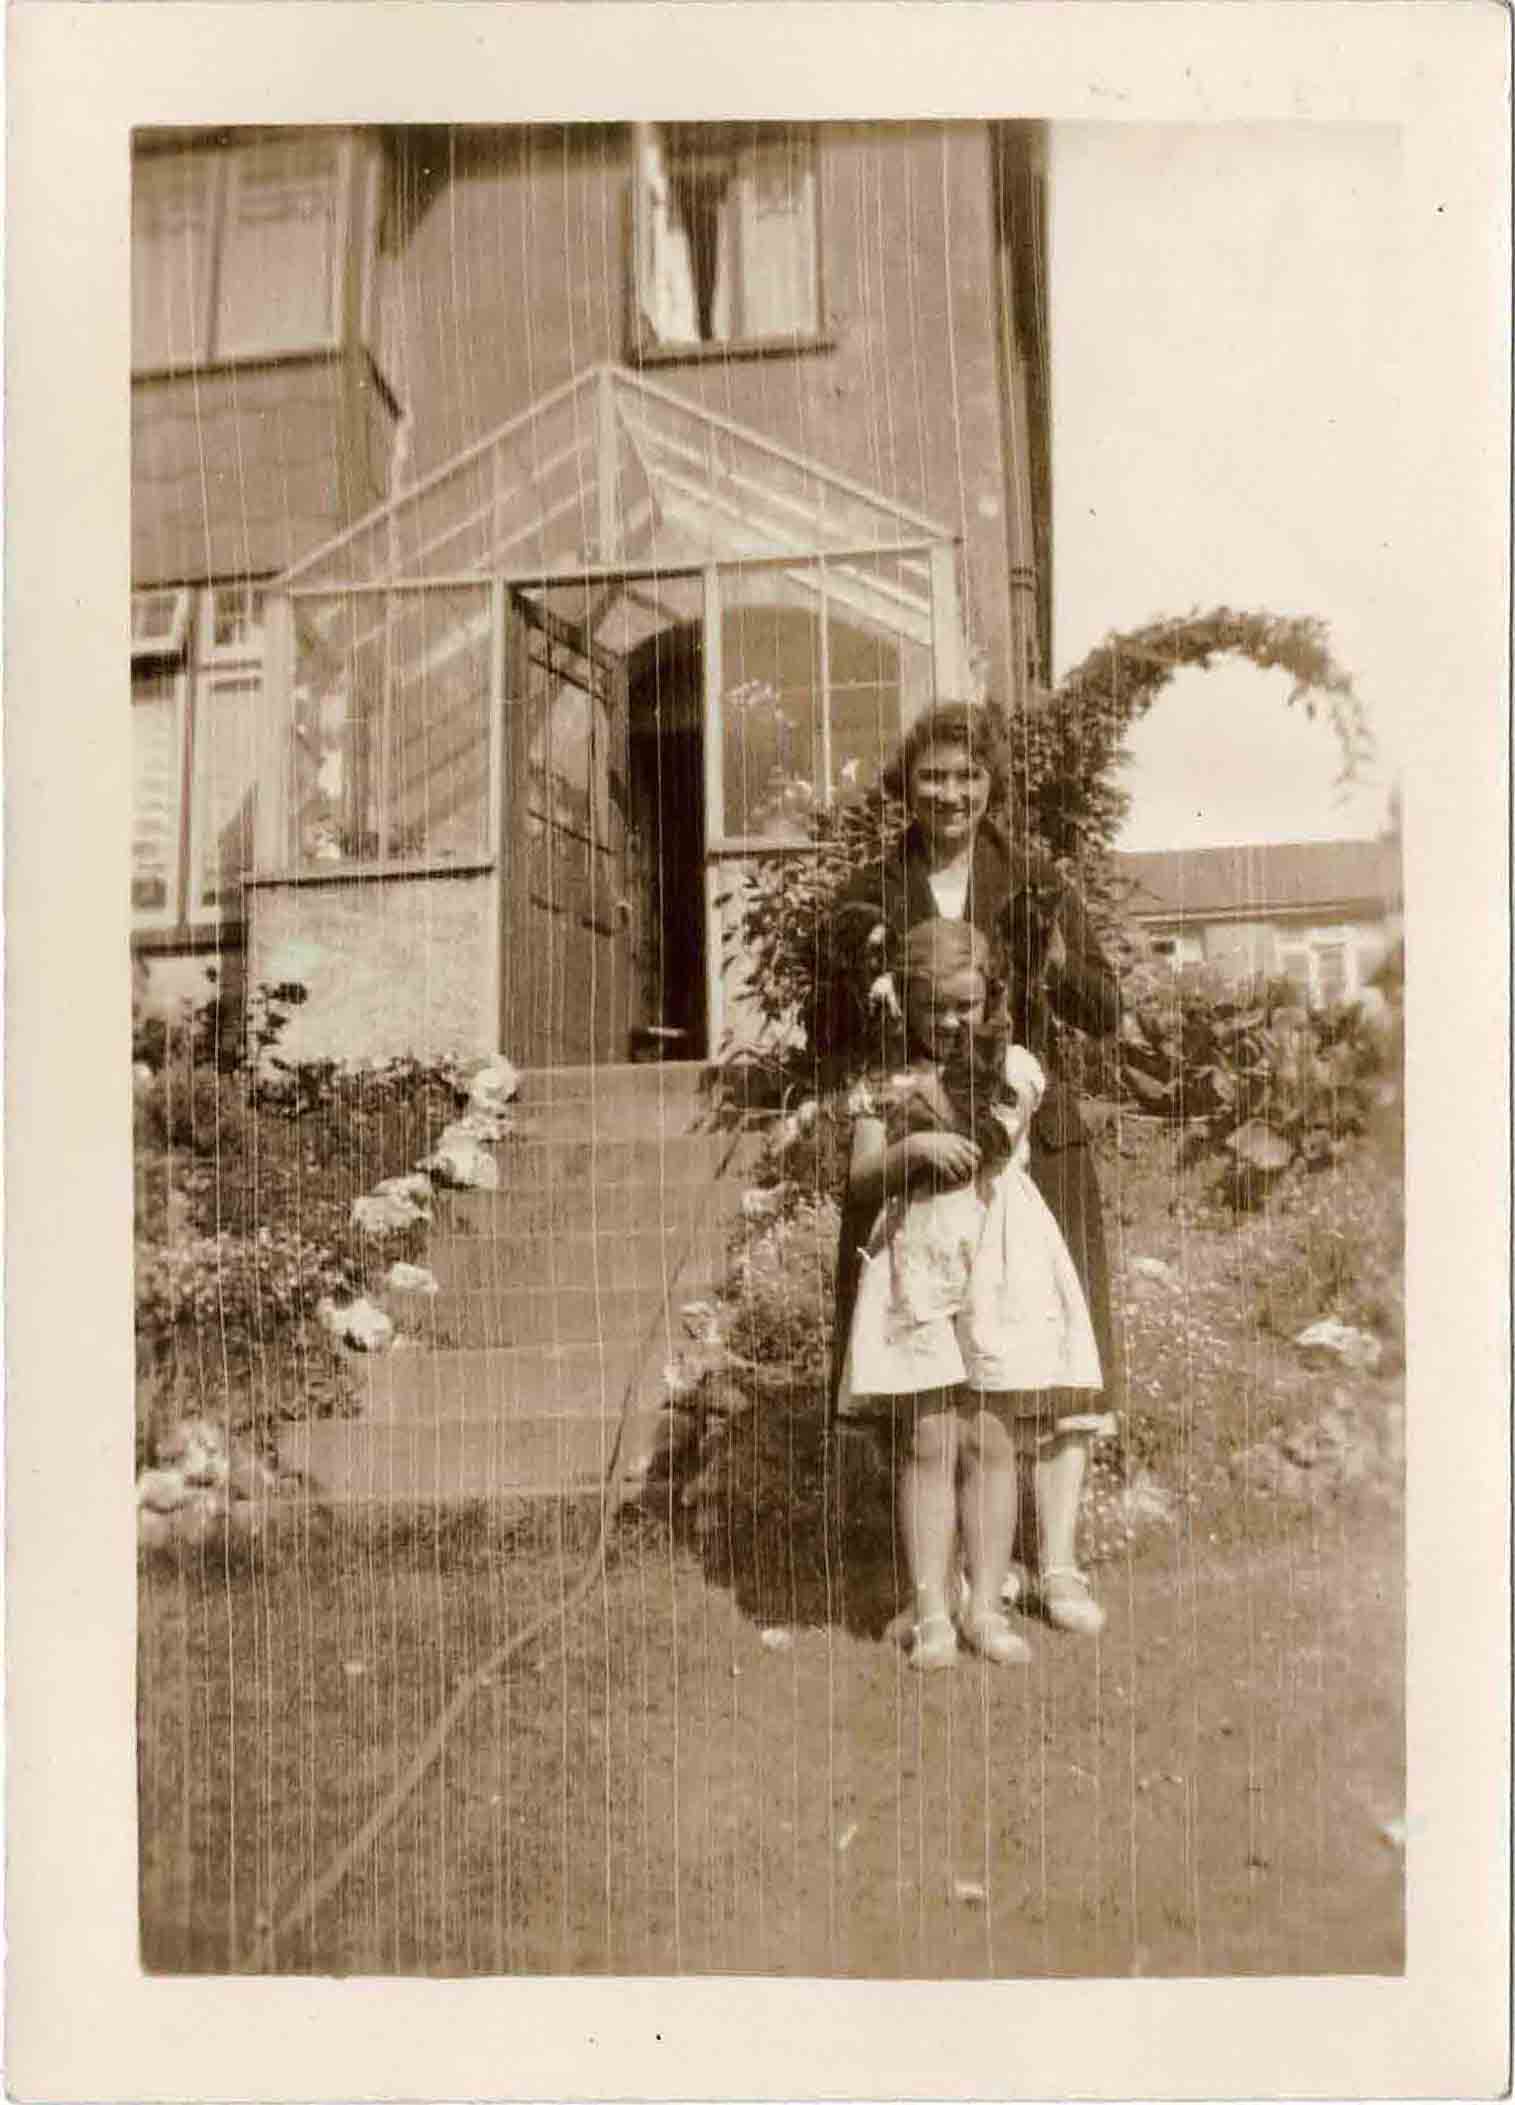 Photograph of Grace Coombe née Loud and Molly Coombe outdoors with cats.